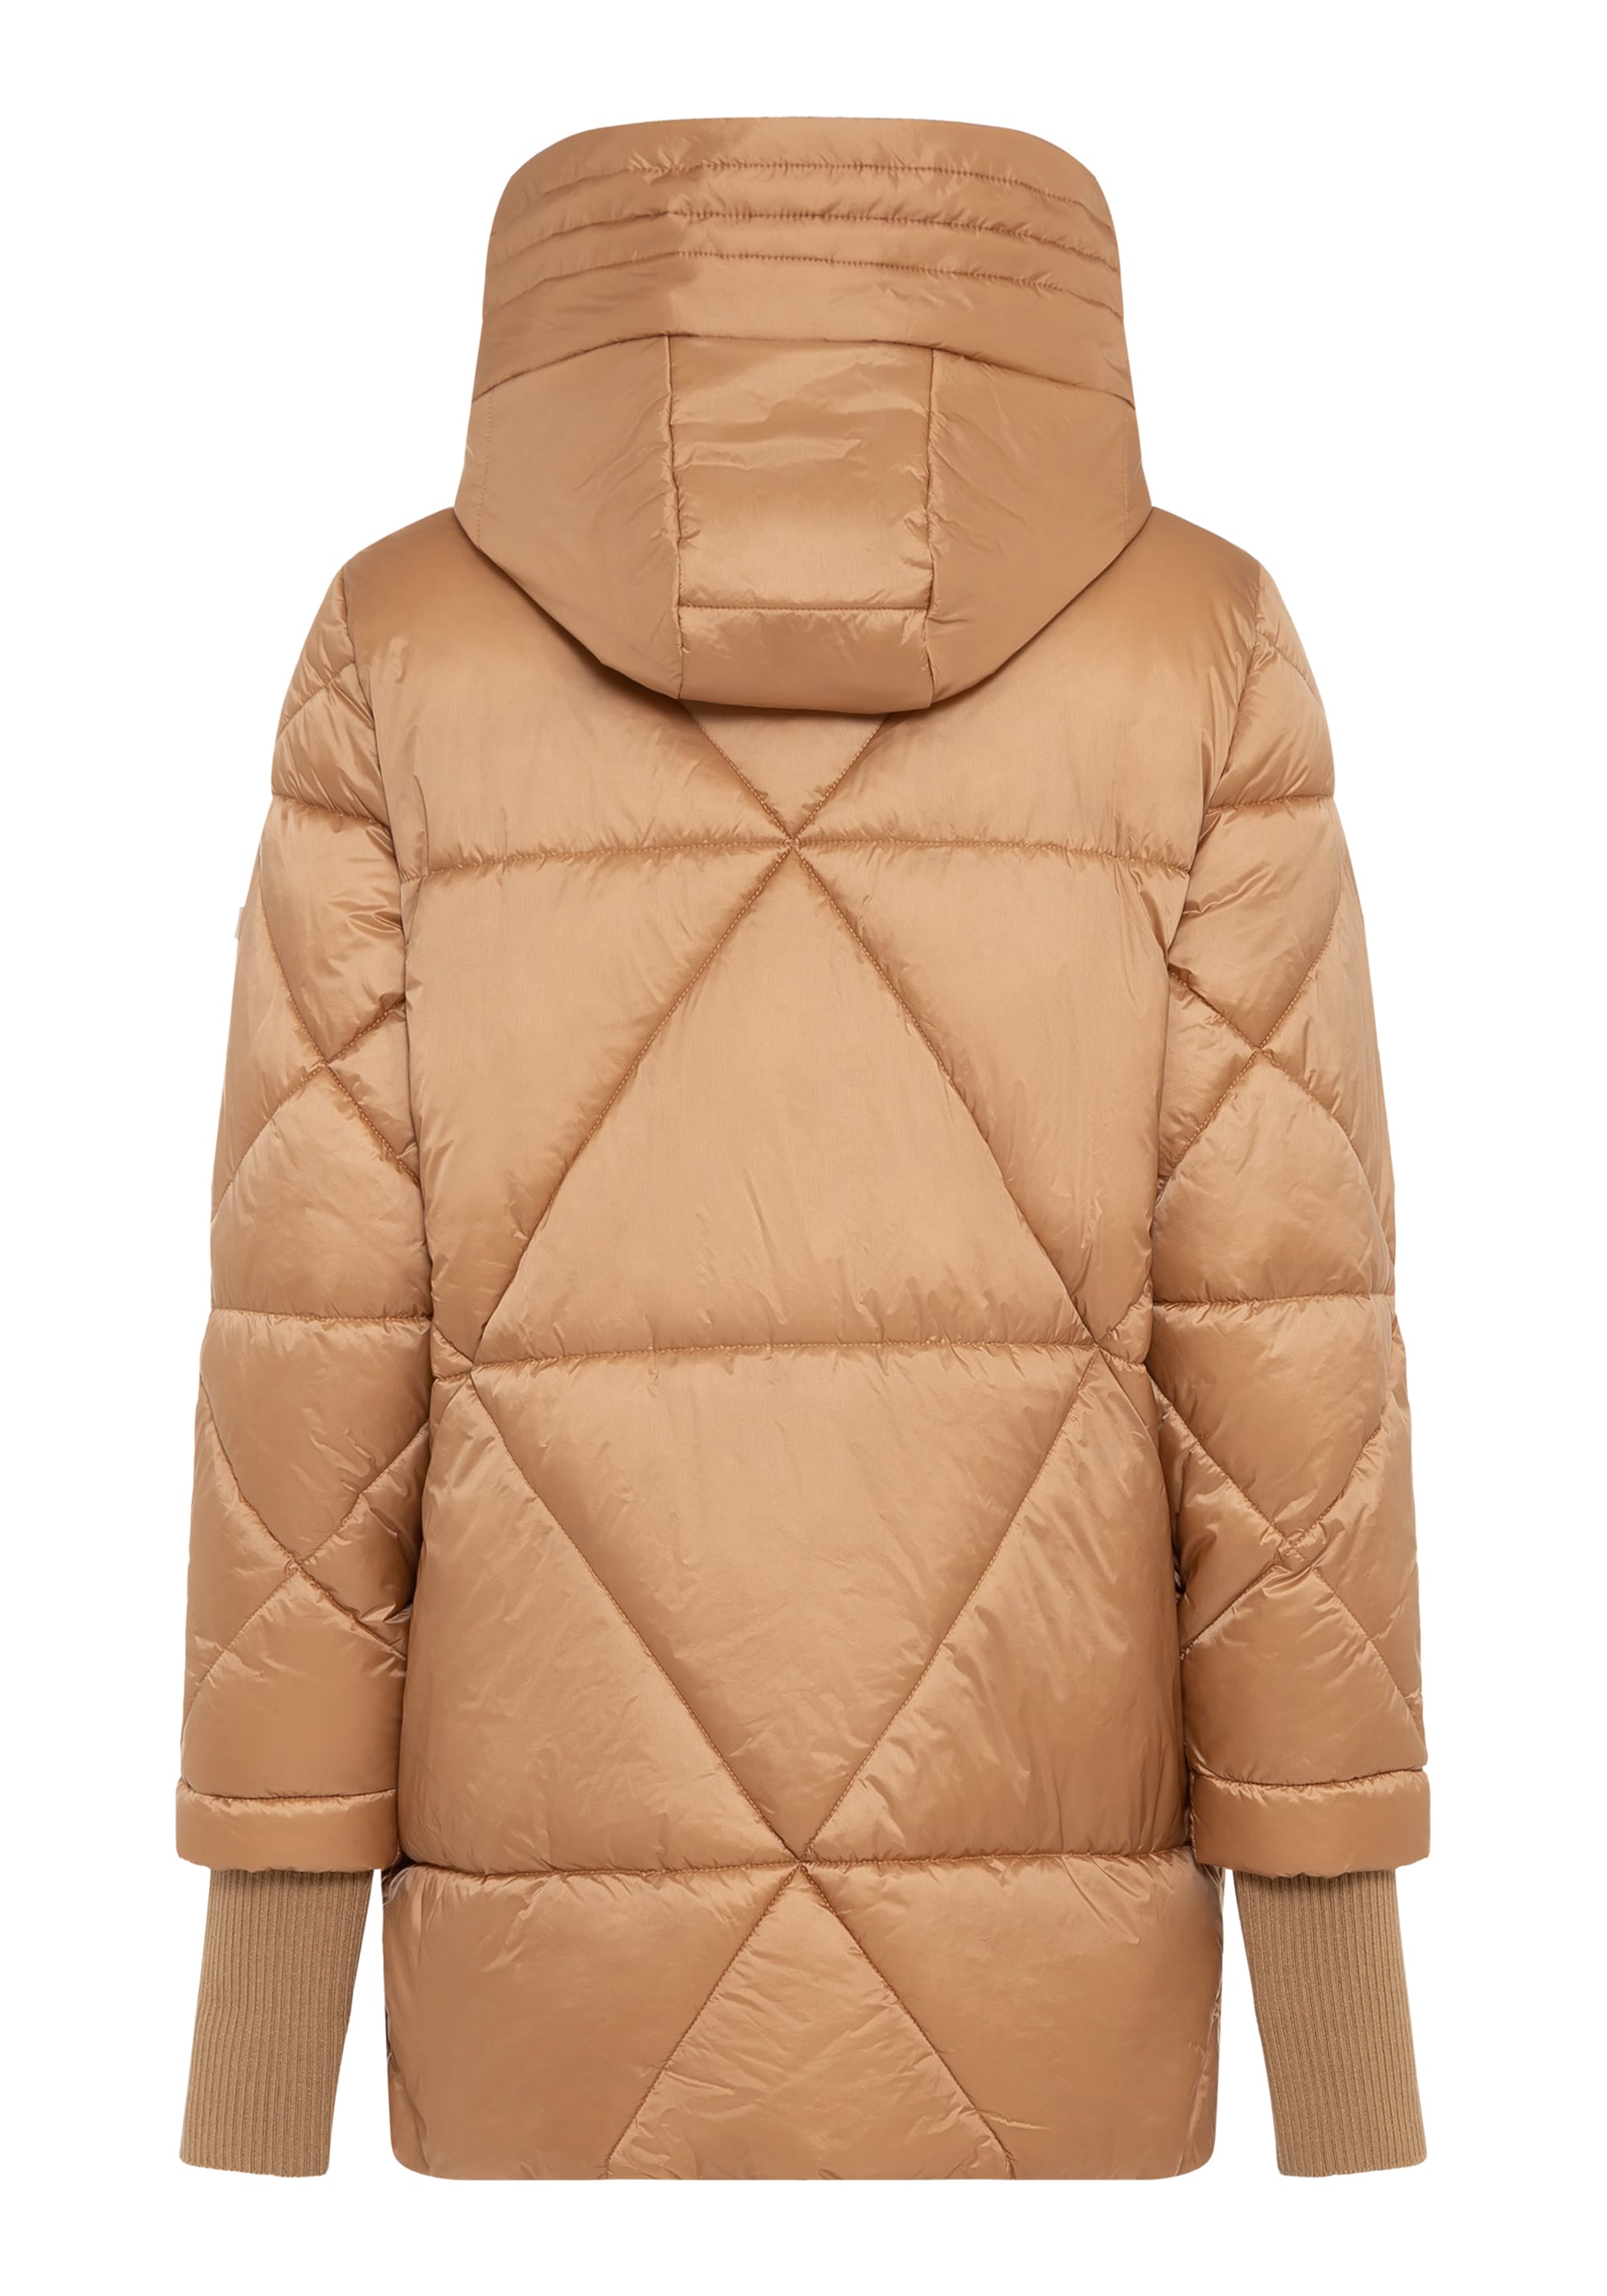 Women's Quilted Jackets / Puffer Jackets: 1000+ Items up to −87%